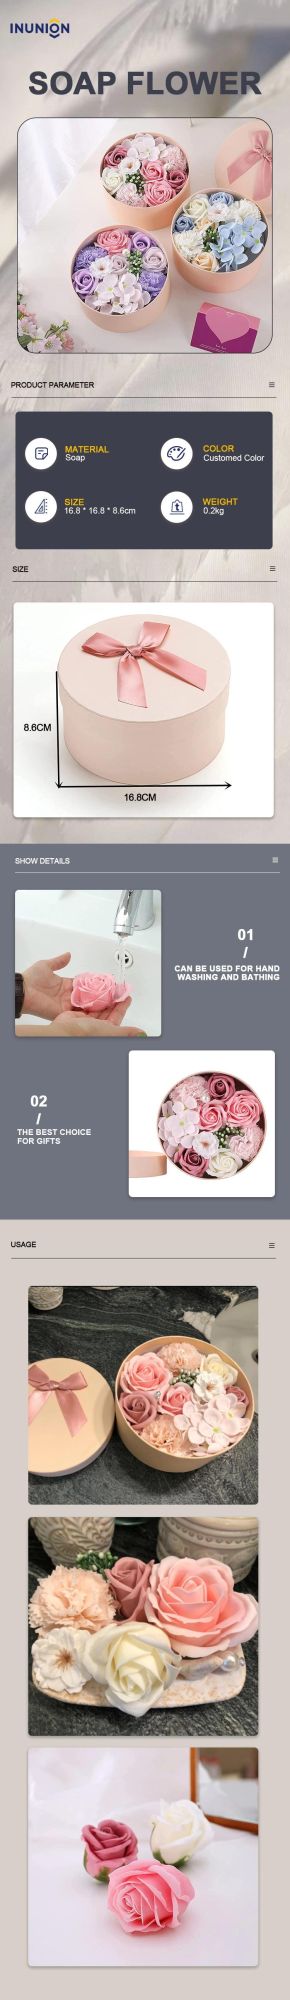 Factory Hotsale Artificial Soap Roses Flower Gift Box Round Box for Valentine′ S Day, Mother′ S Day, Christmas